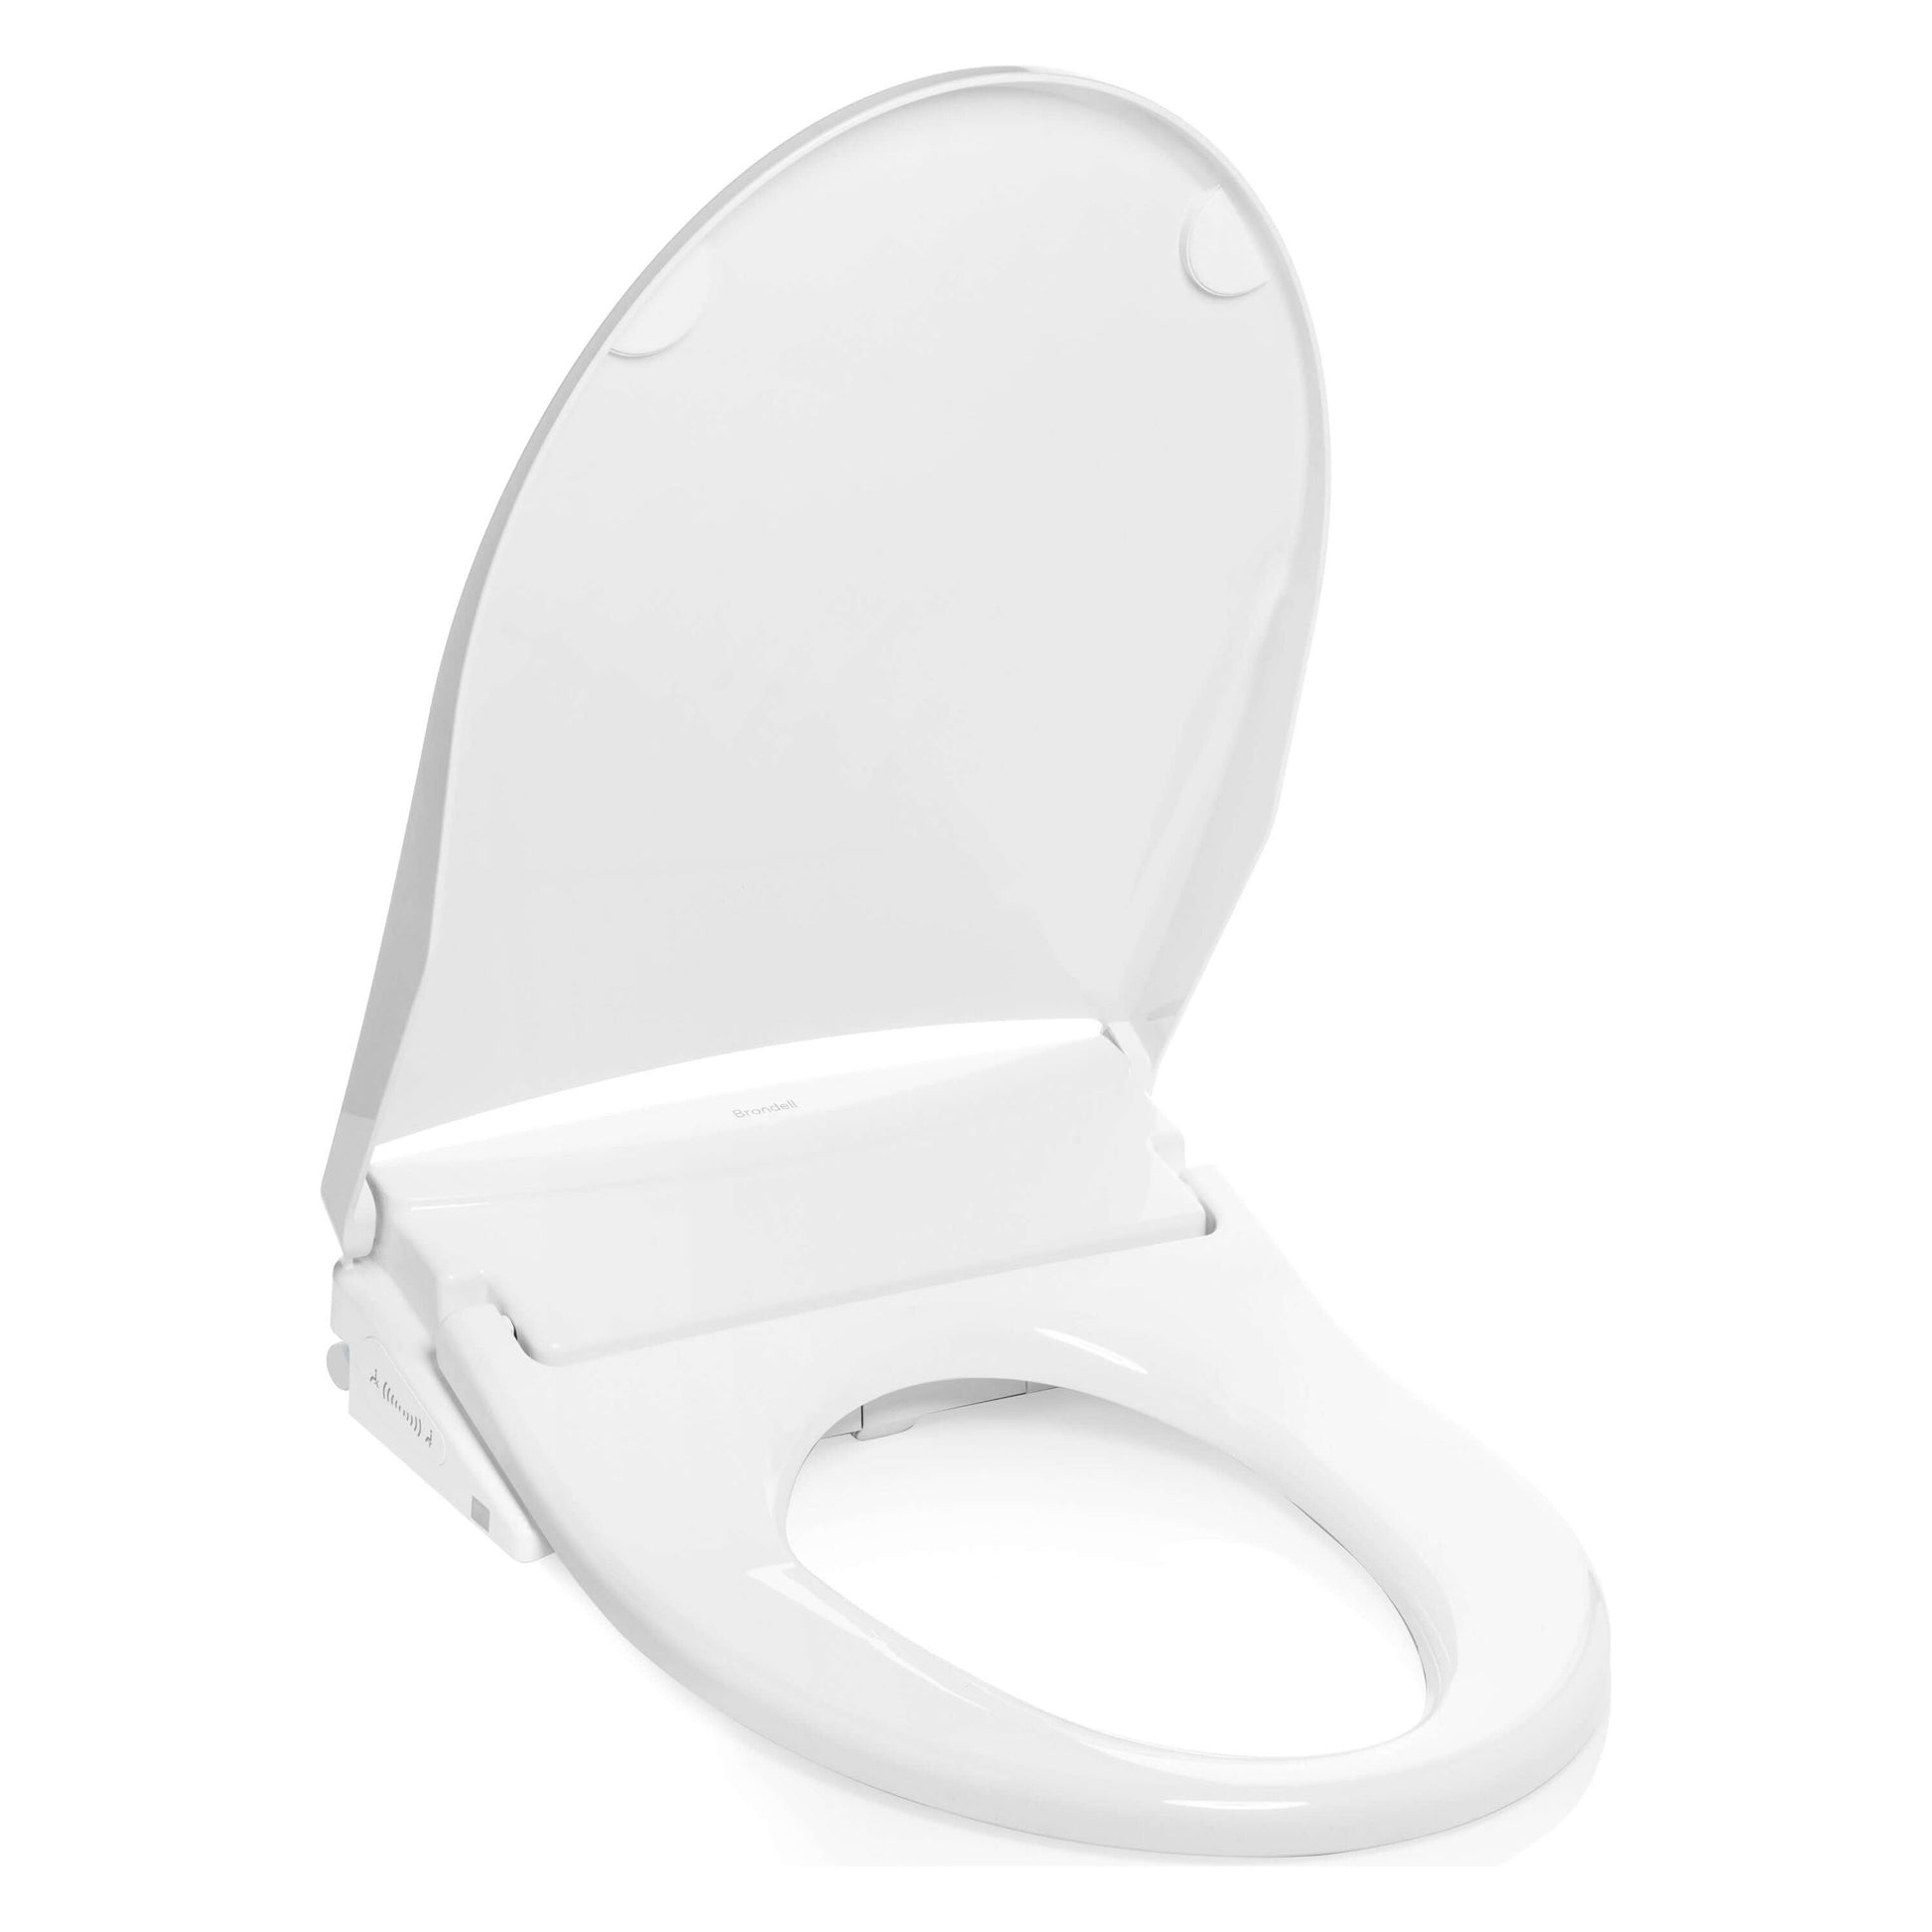 Swash Thinline T44 Bidet Seat - side angled view with lid open